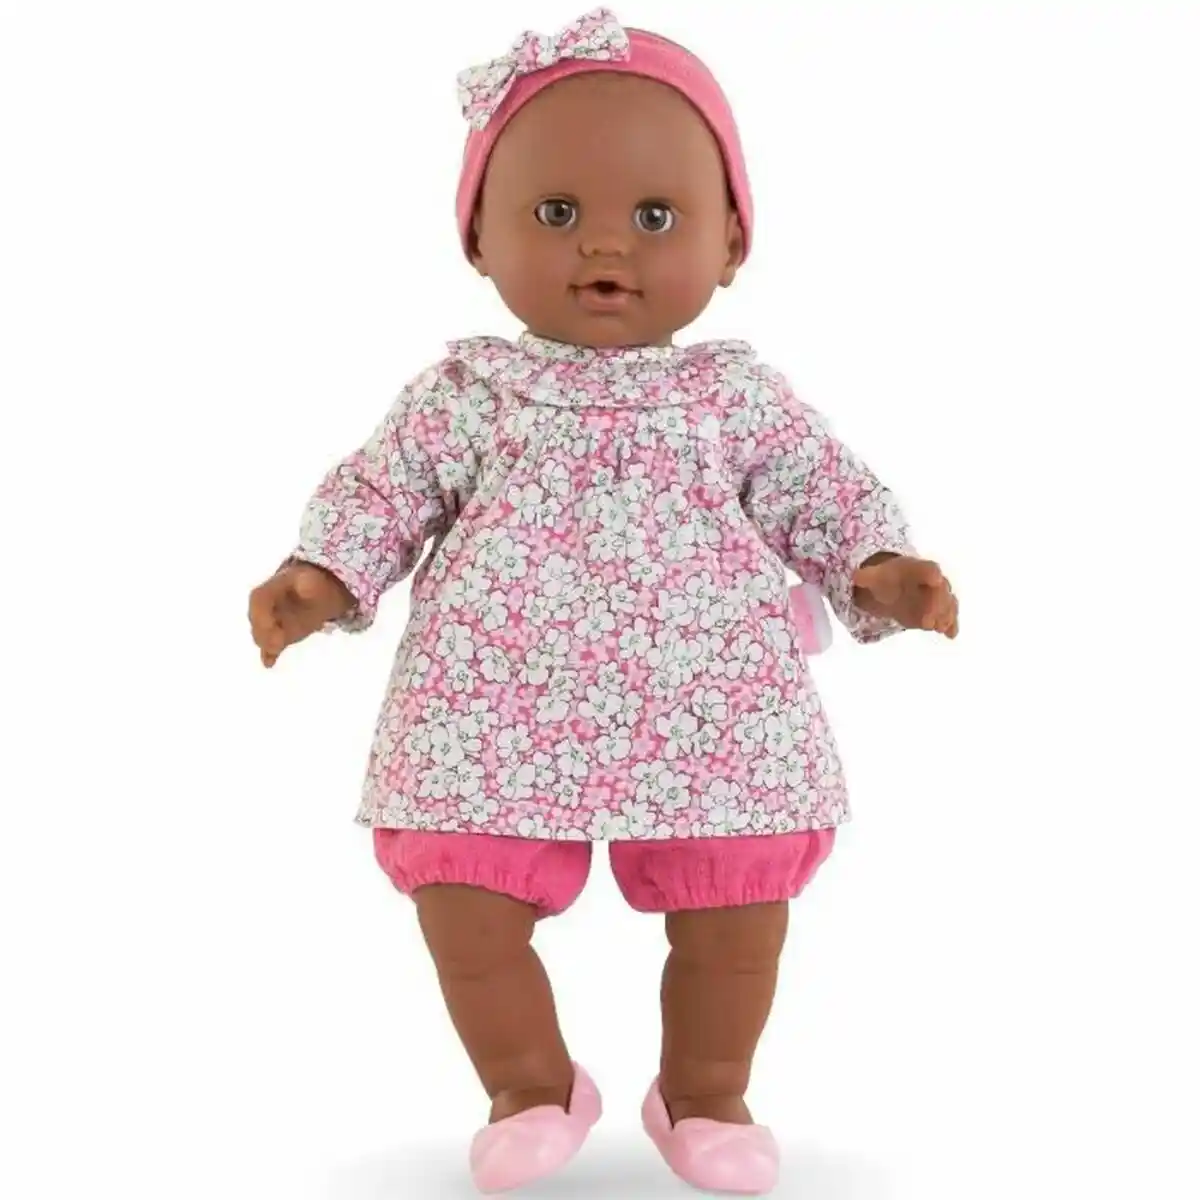 Baby doll Corolle Lilou. SUPERDISCOUNT FRANCE